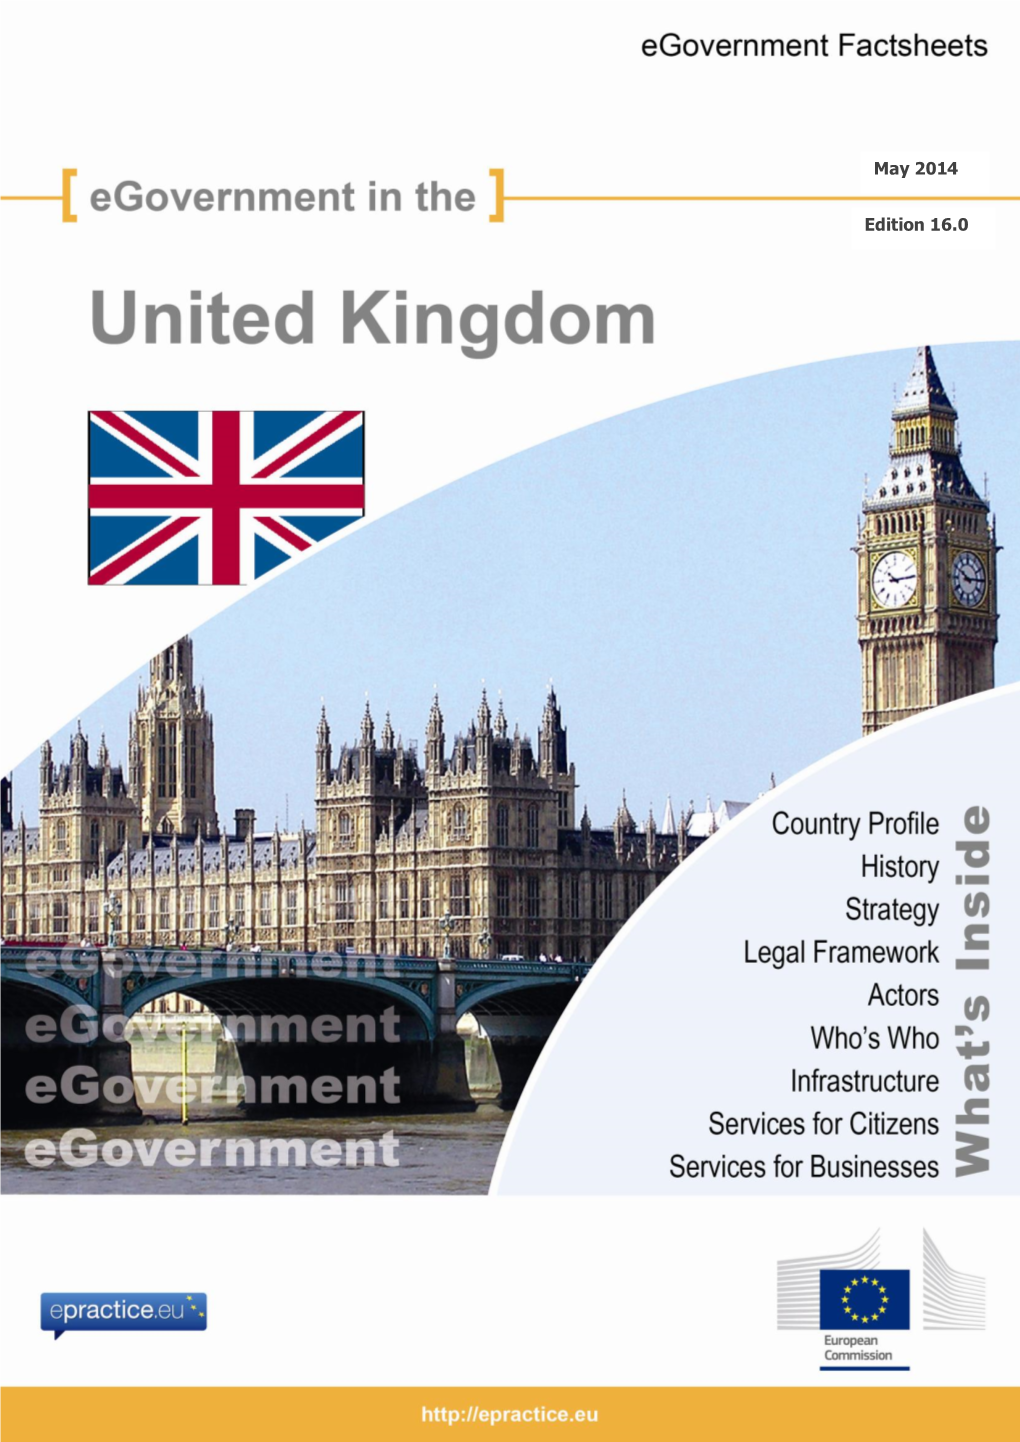 Egovernment in the UK May 2014